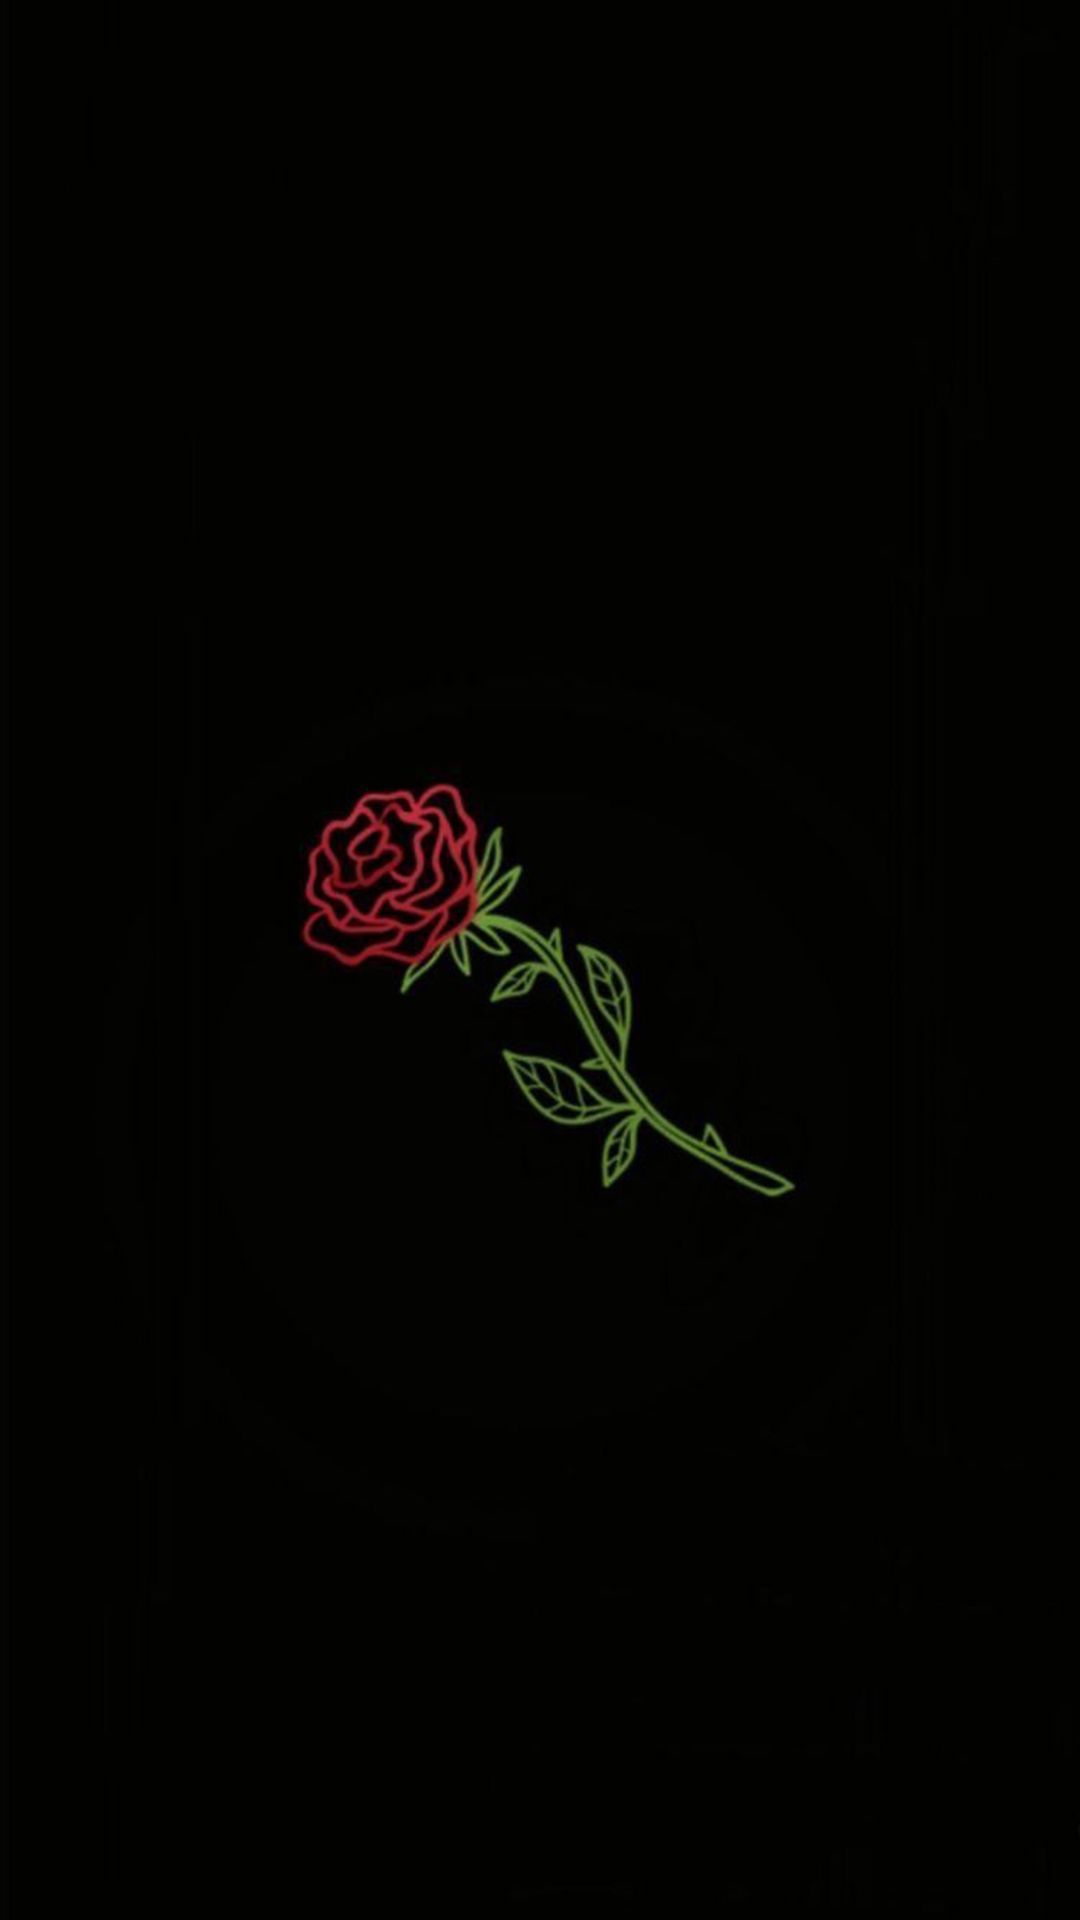 A black background with the words 'red rose' - Black rose, glitch, roses